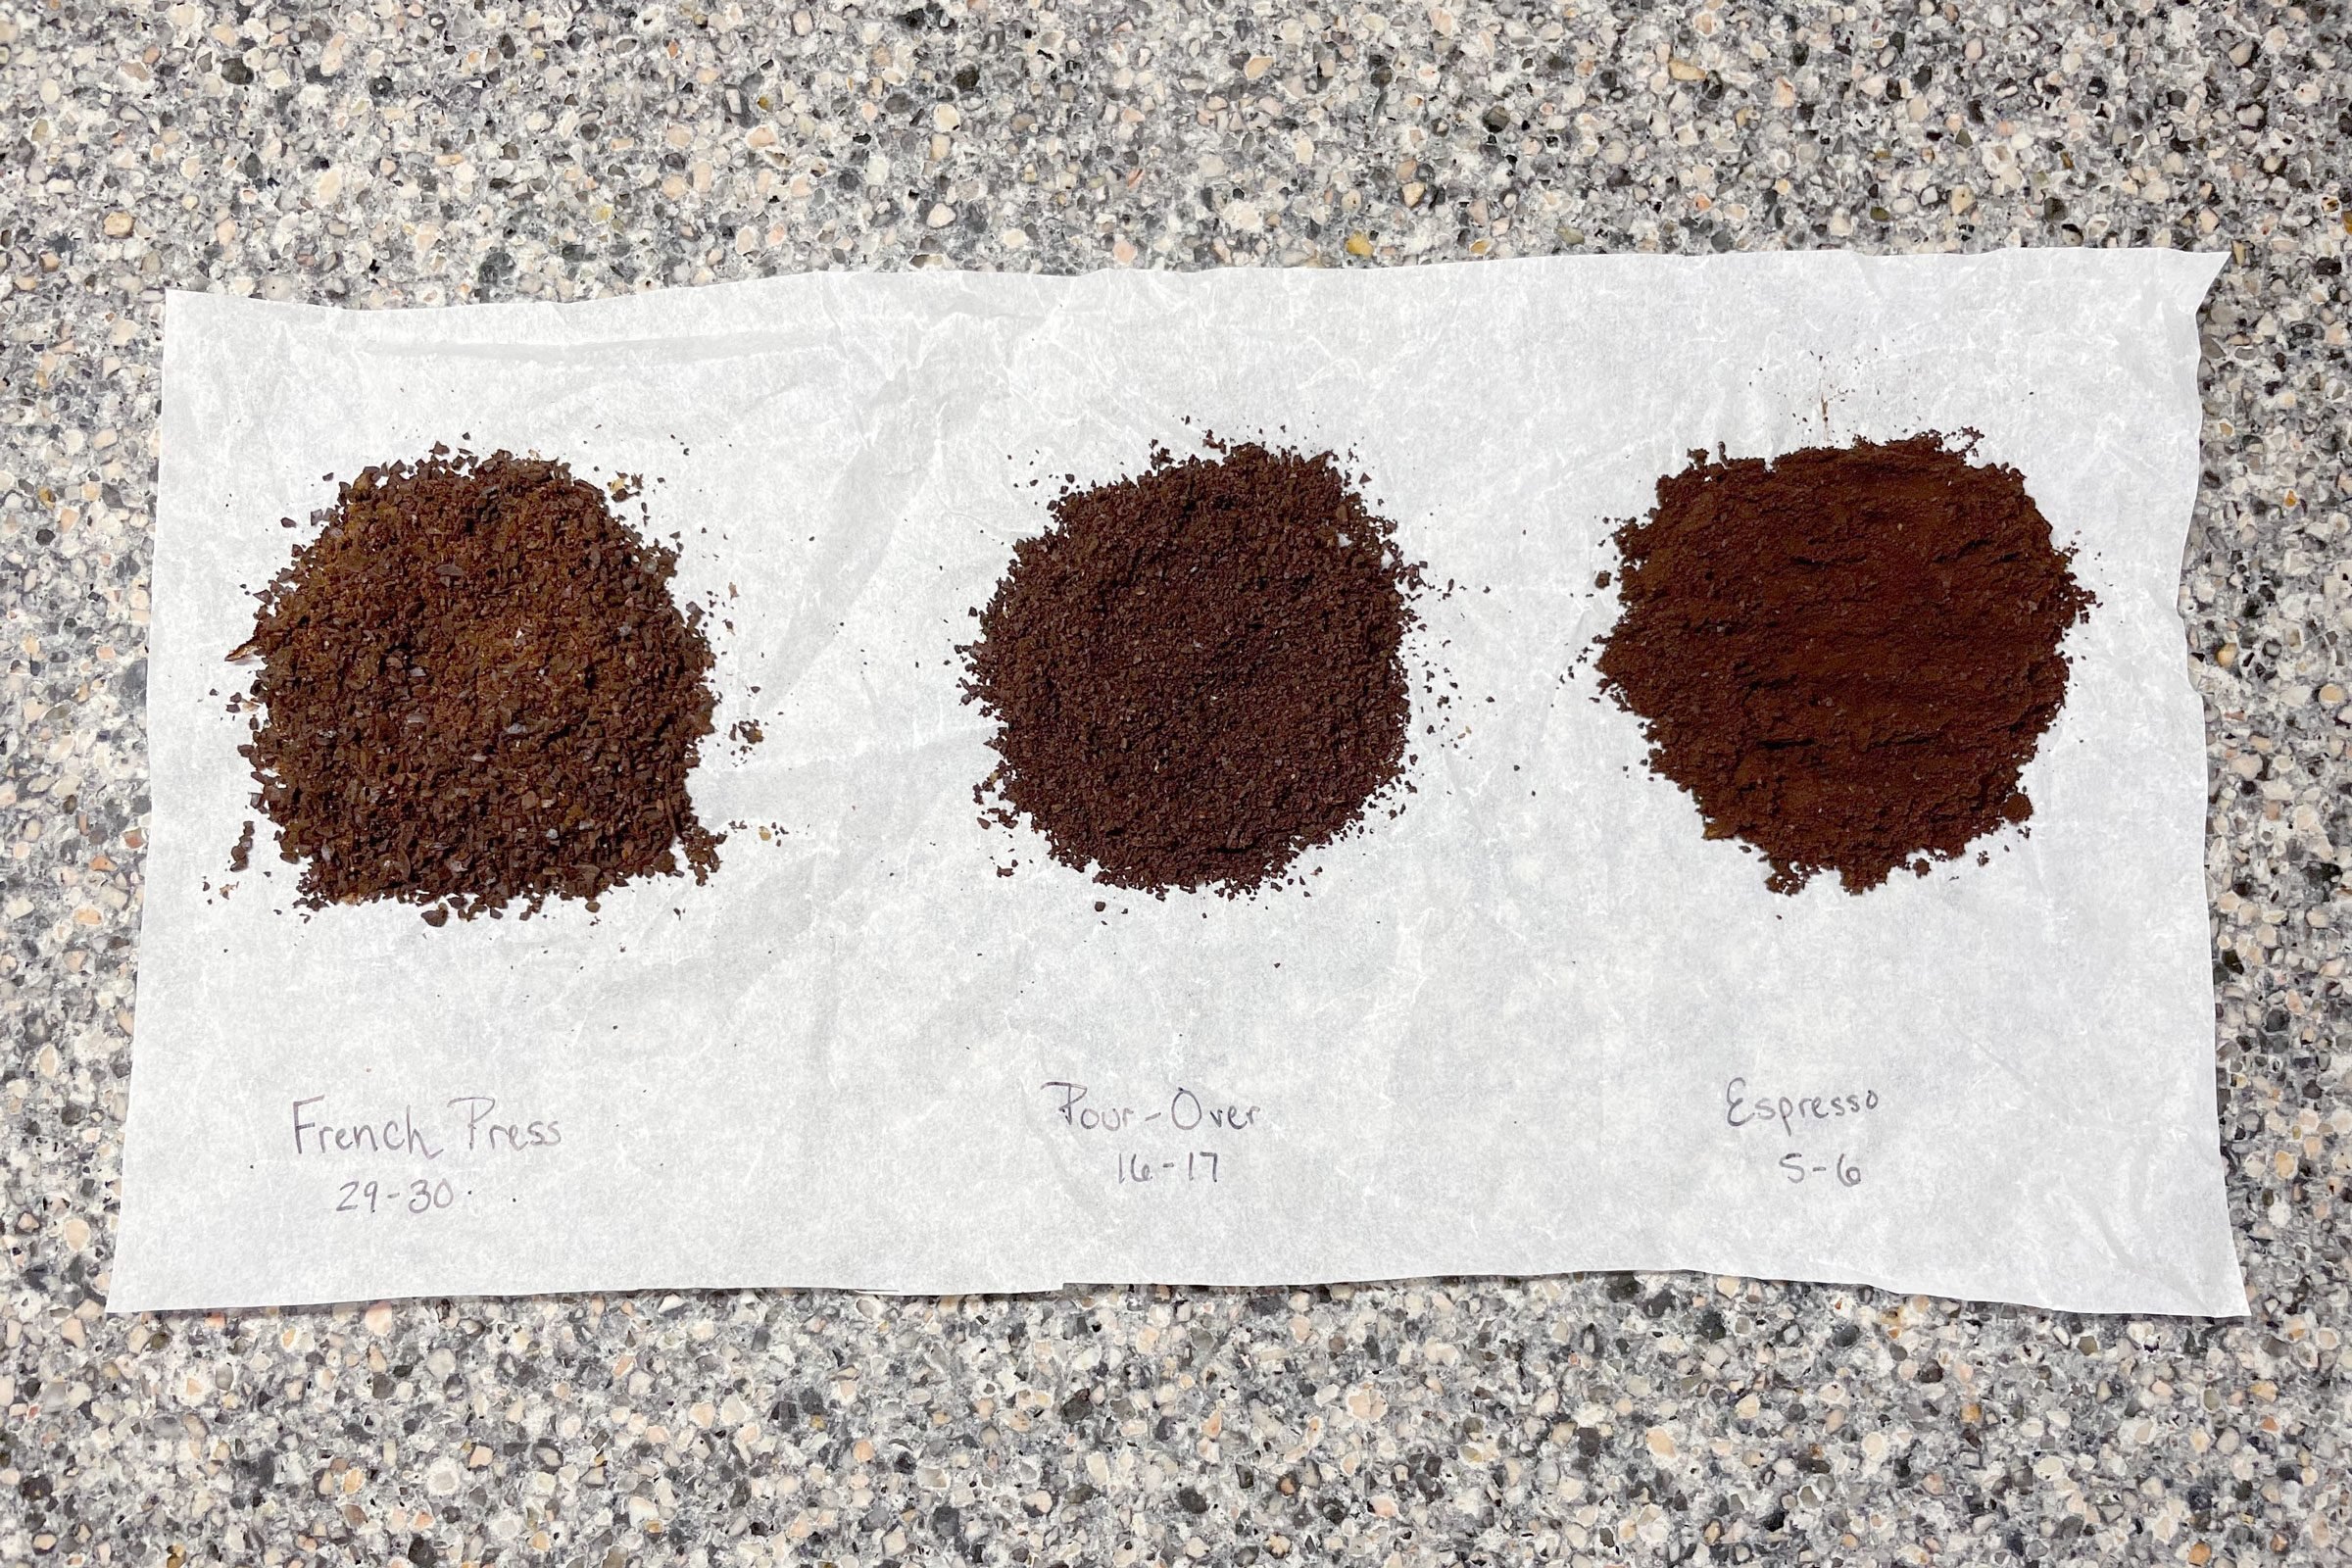 samples of coffee grounds from using the Baratza Encore Conical Burr Coffee Grinder 